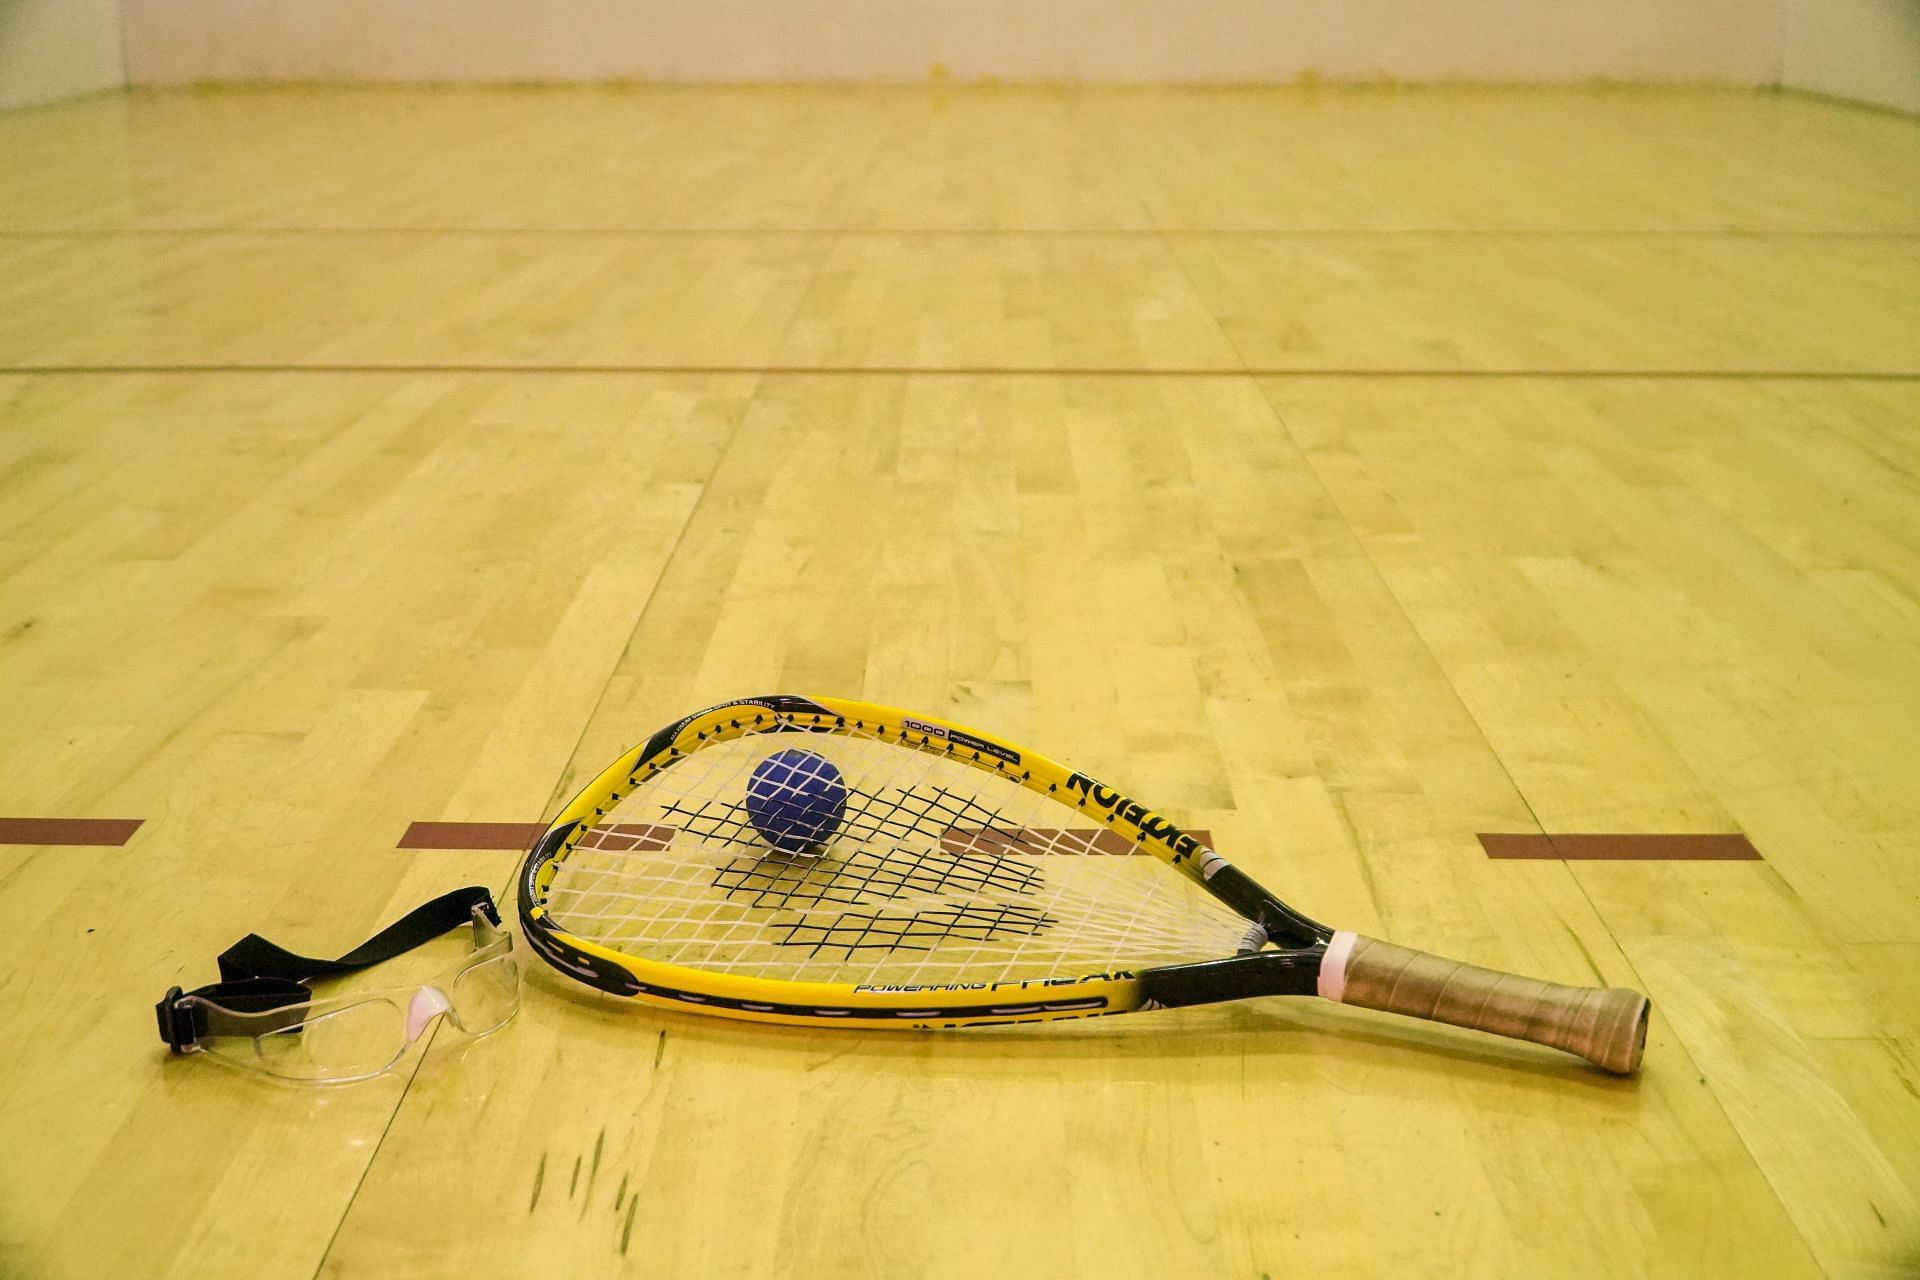 Exercises can help you get better at racquetball. (Image via unsplash/Thomas Park)